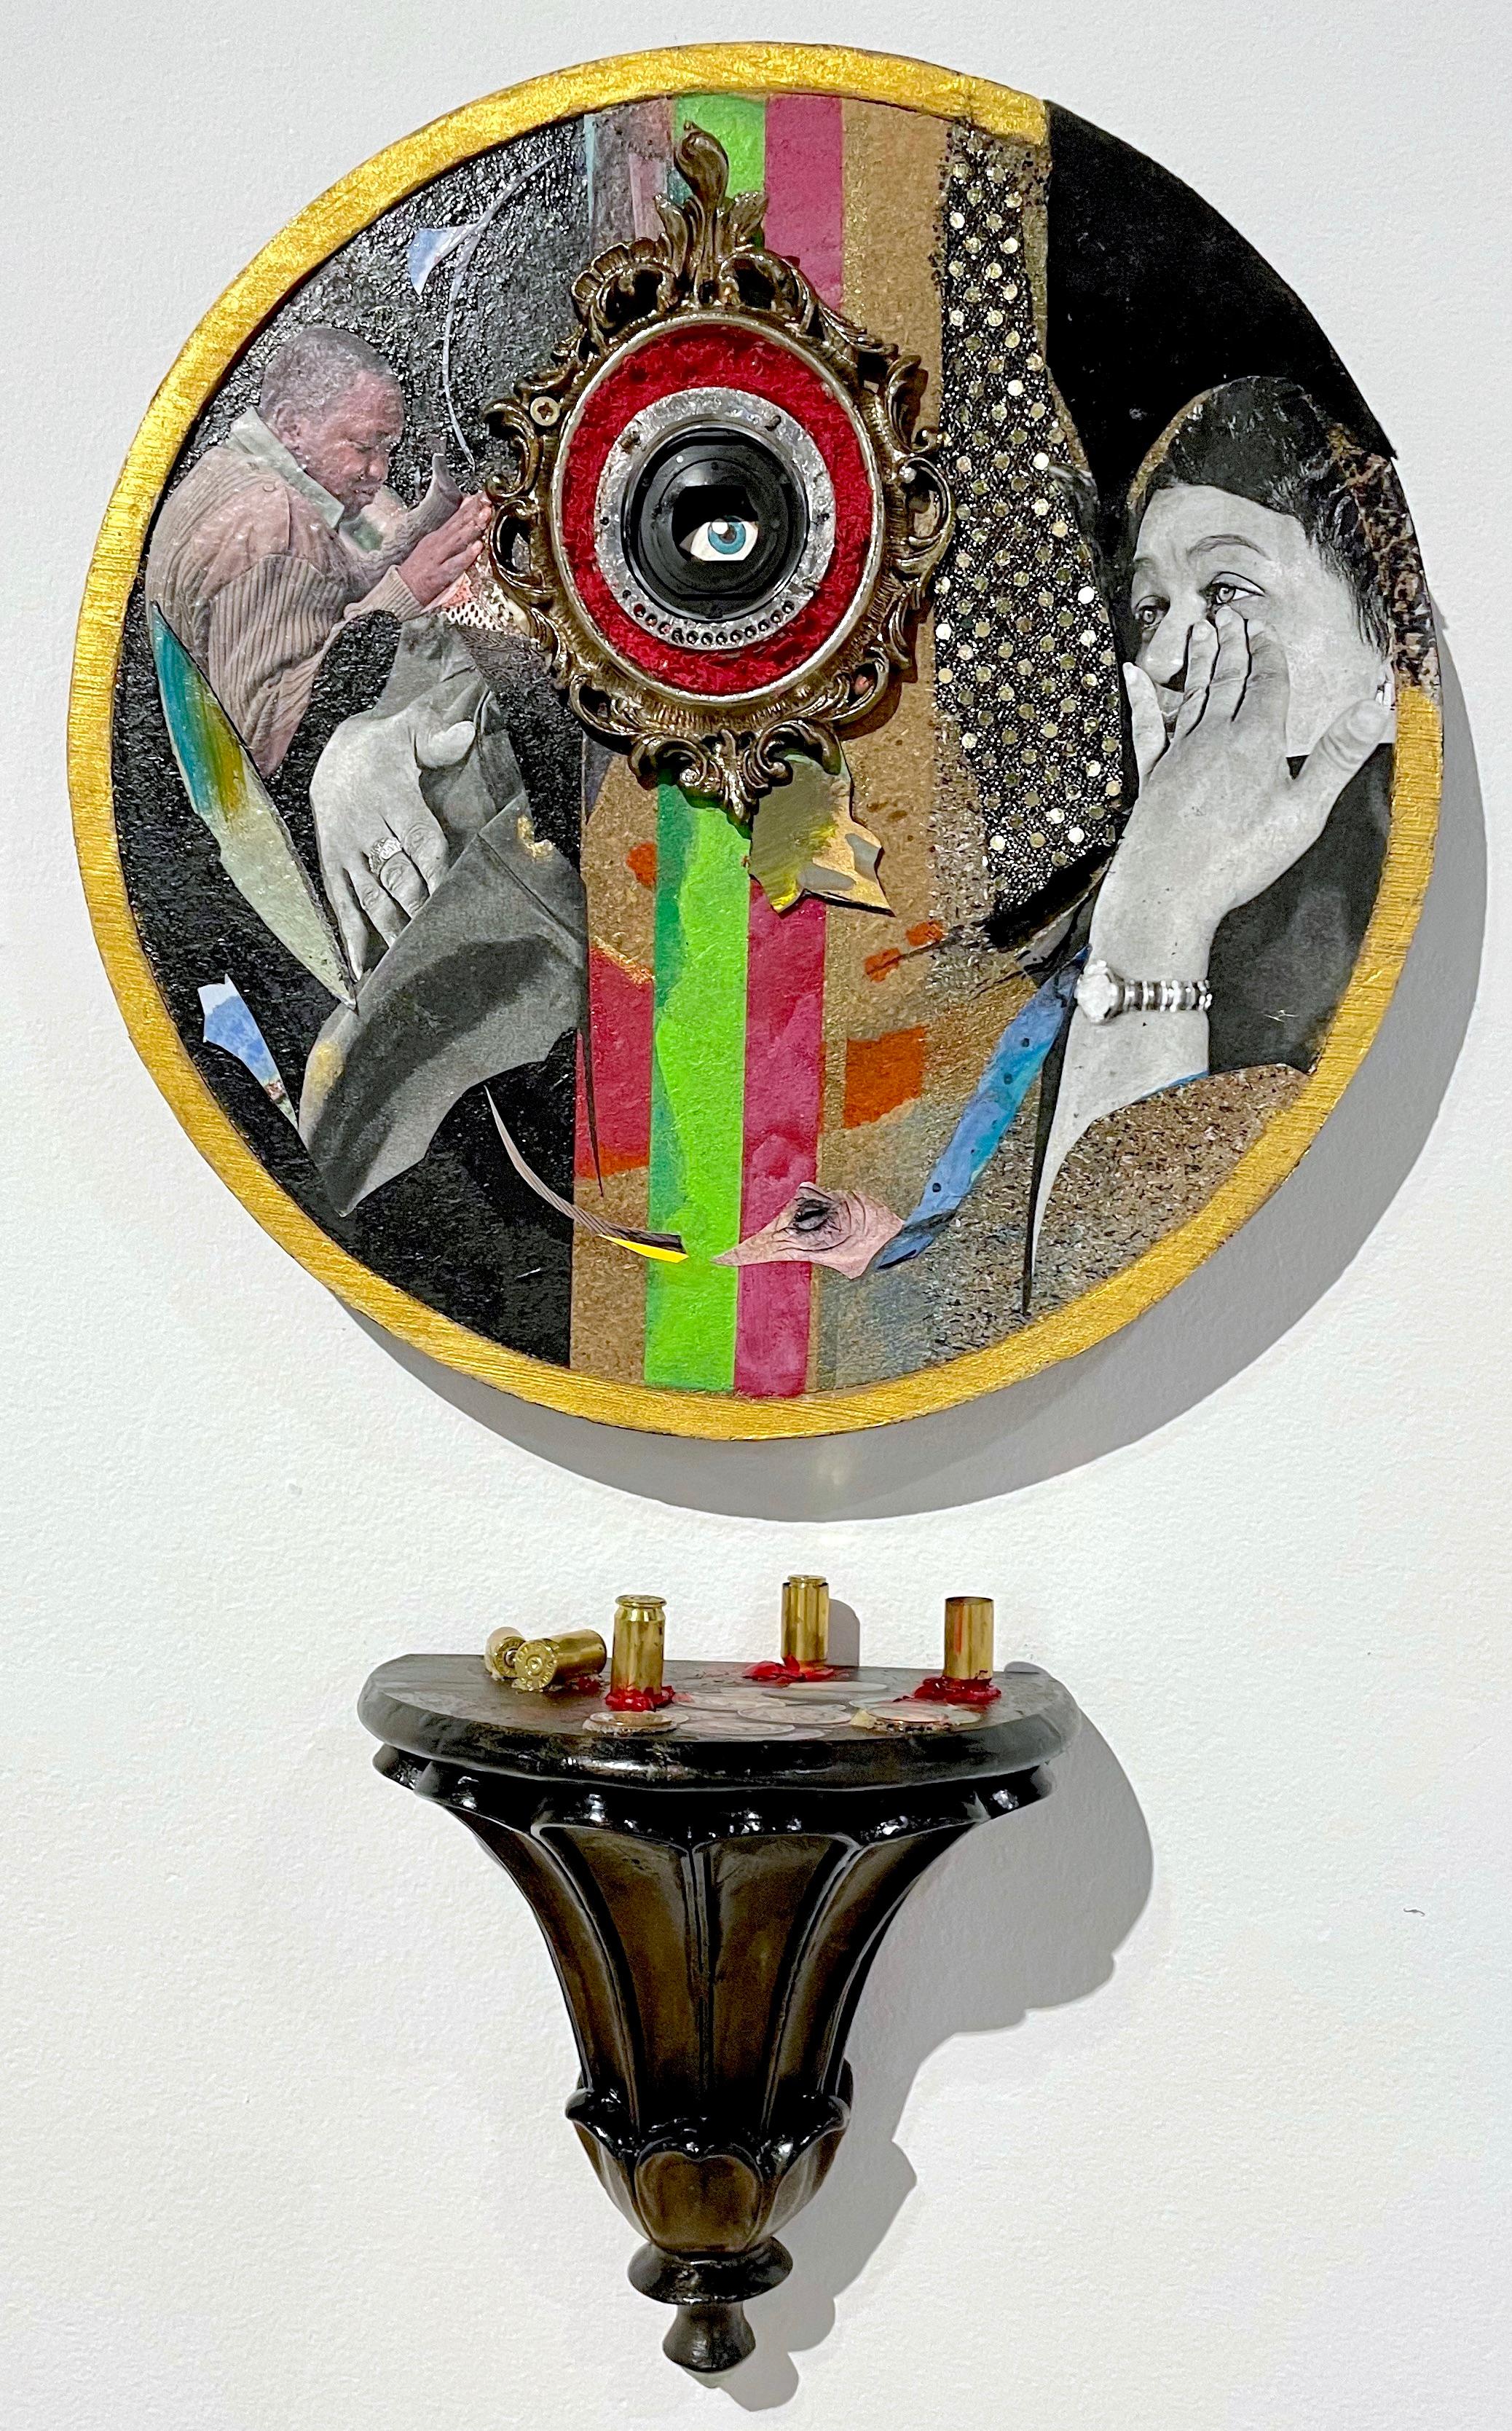 Biography of a Drive-By: wall sculpture by Black African-American artist 